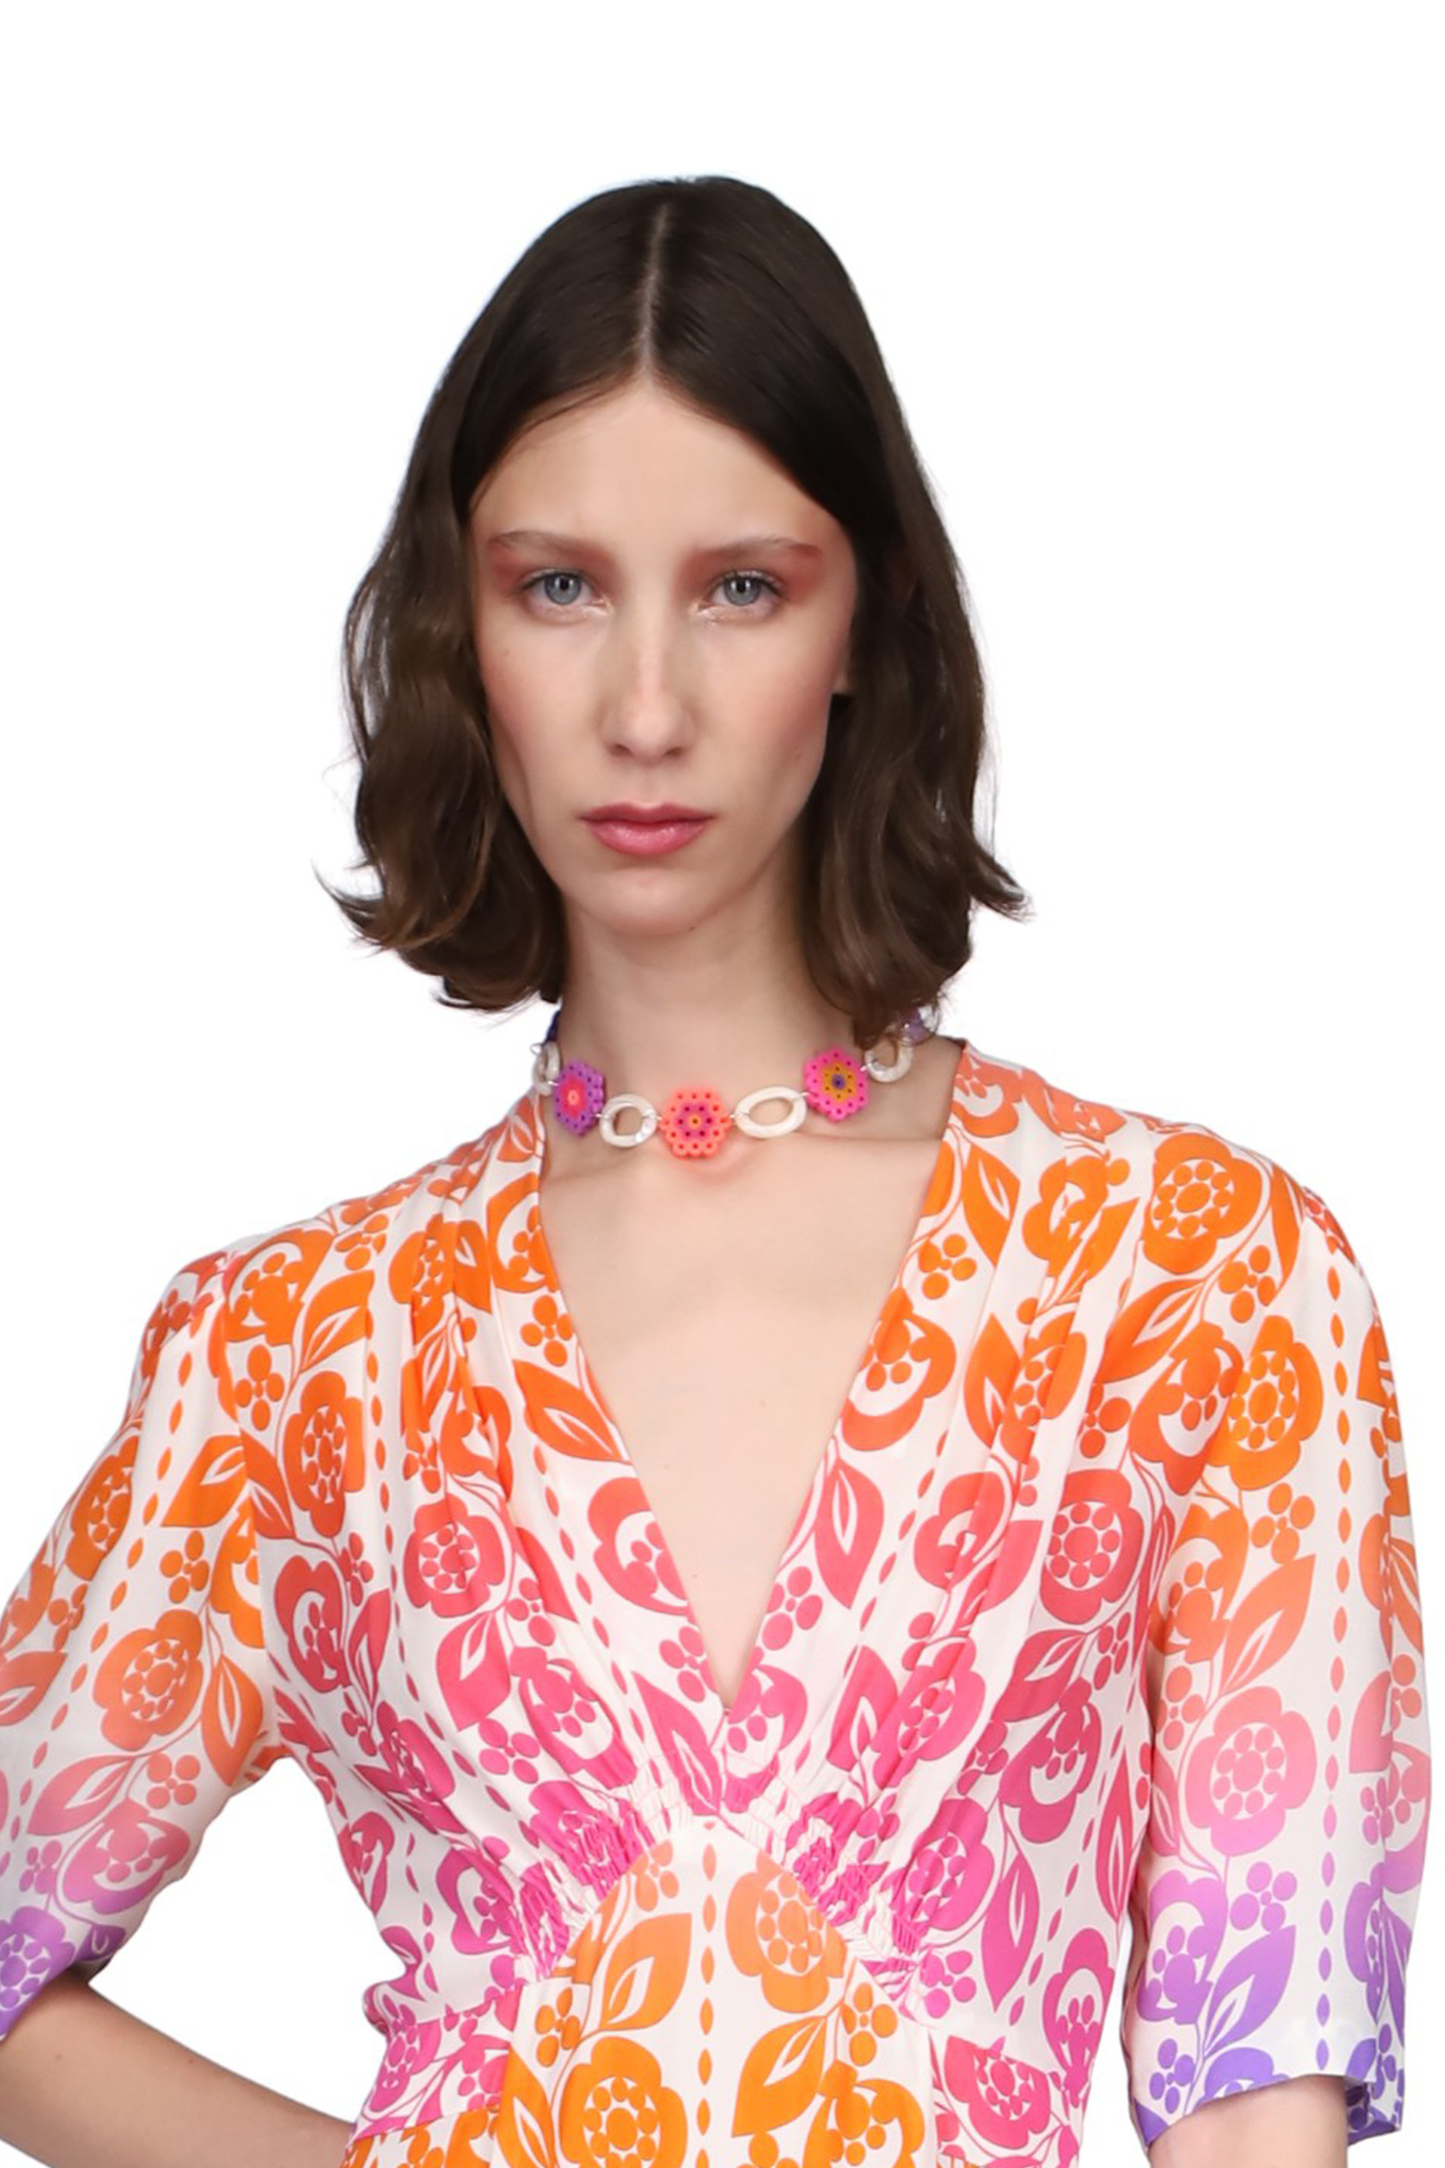 Daisy Chains Mother of Pearl Link Necklace, main color is pink/orange